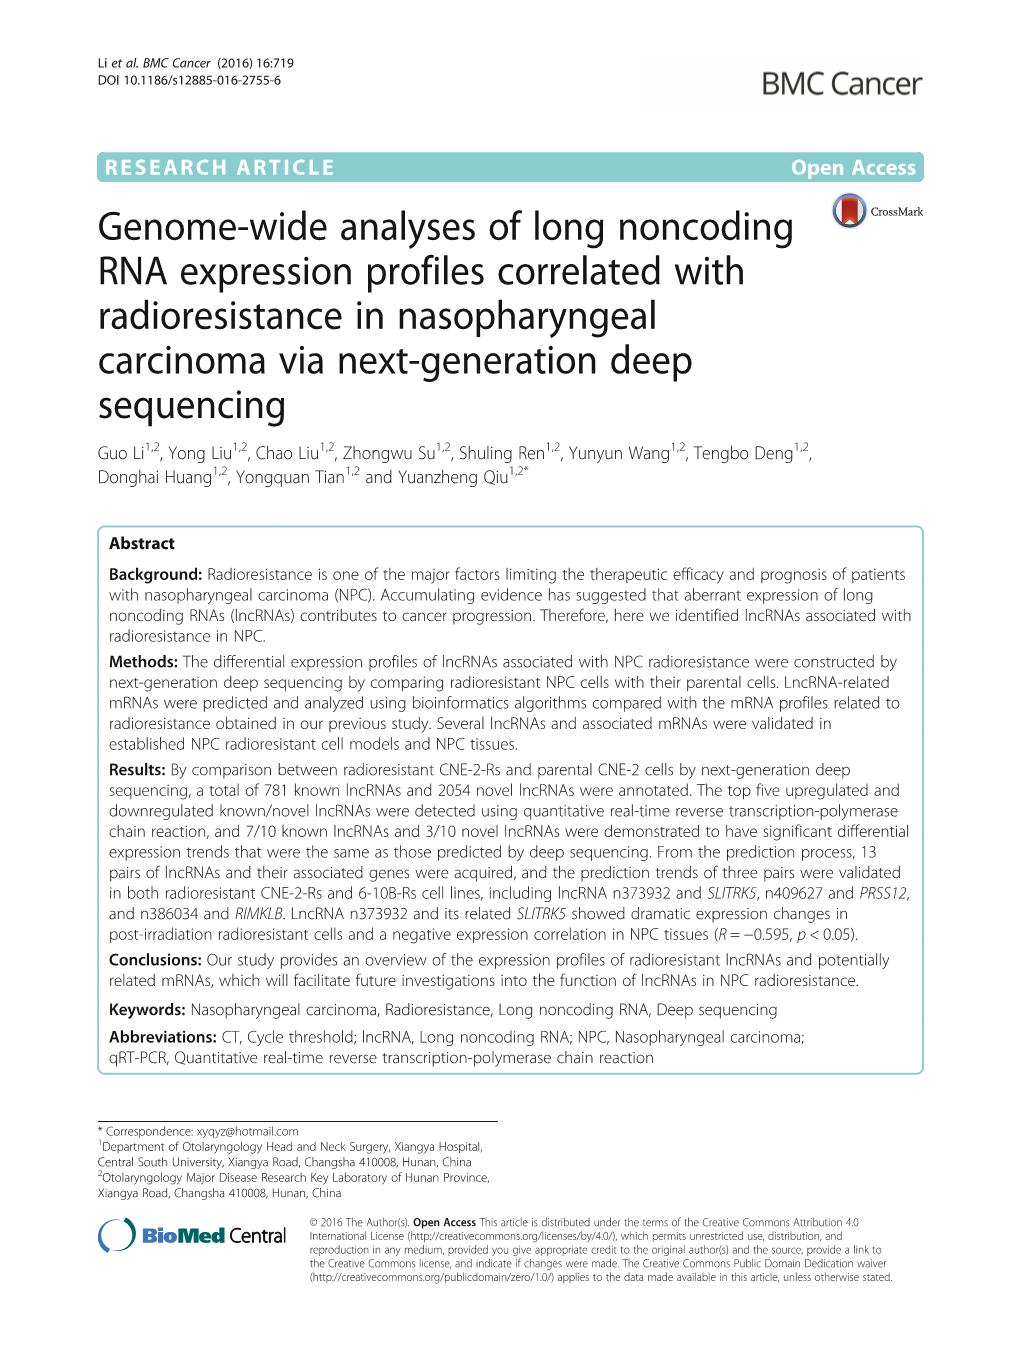 Genome-Wide Analyses of Long Noncoding RNA